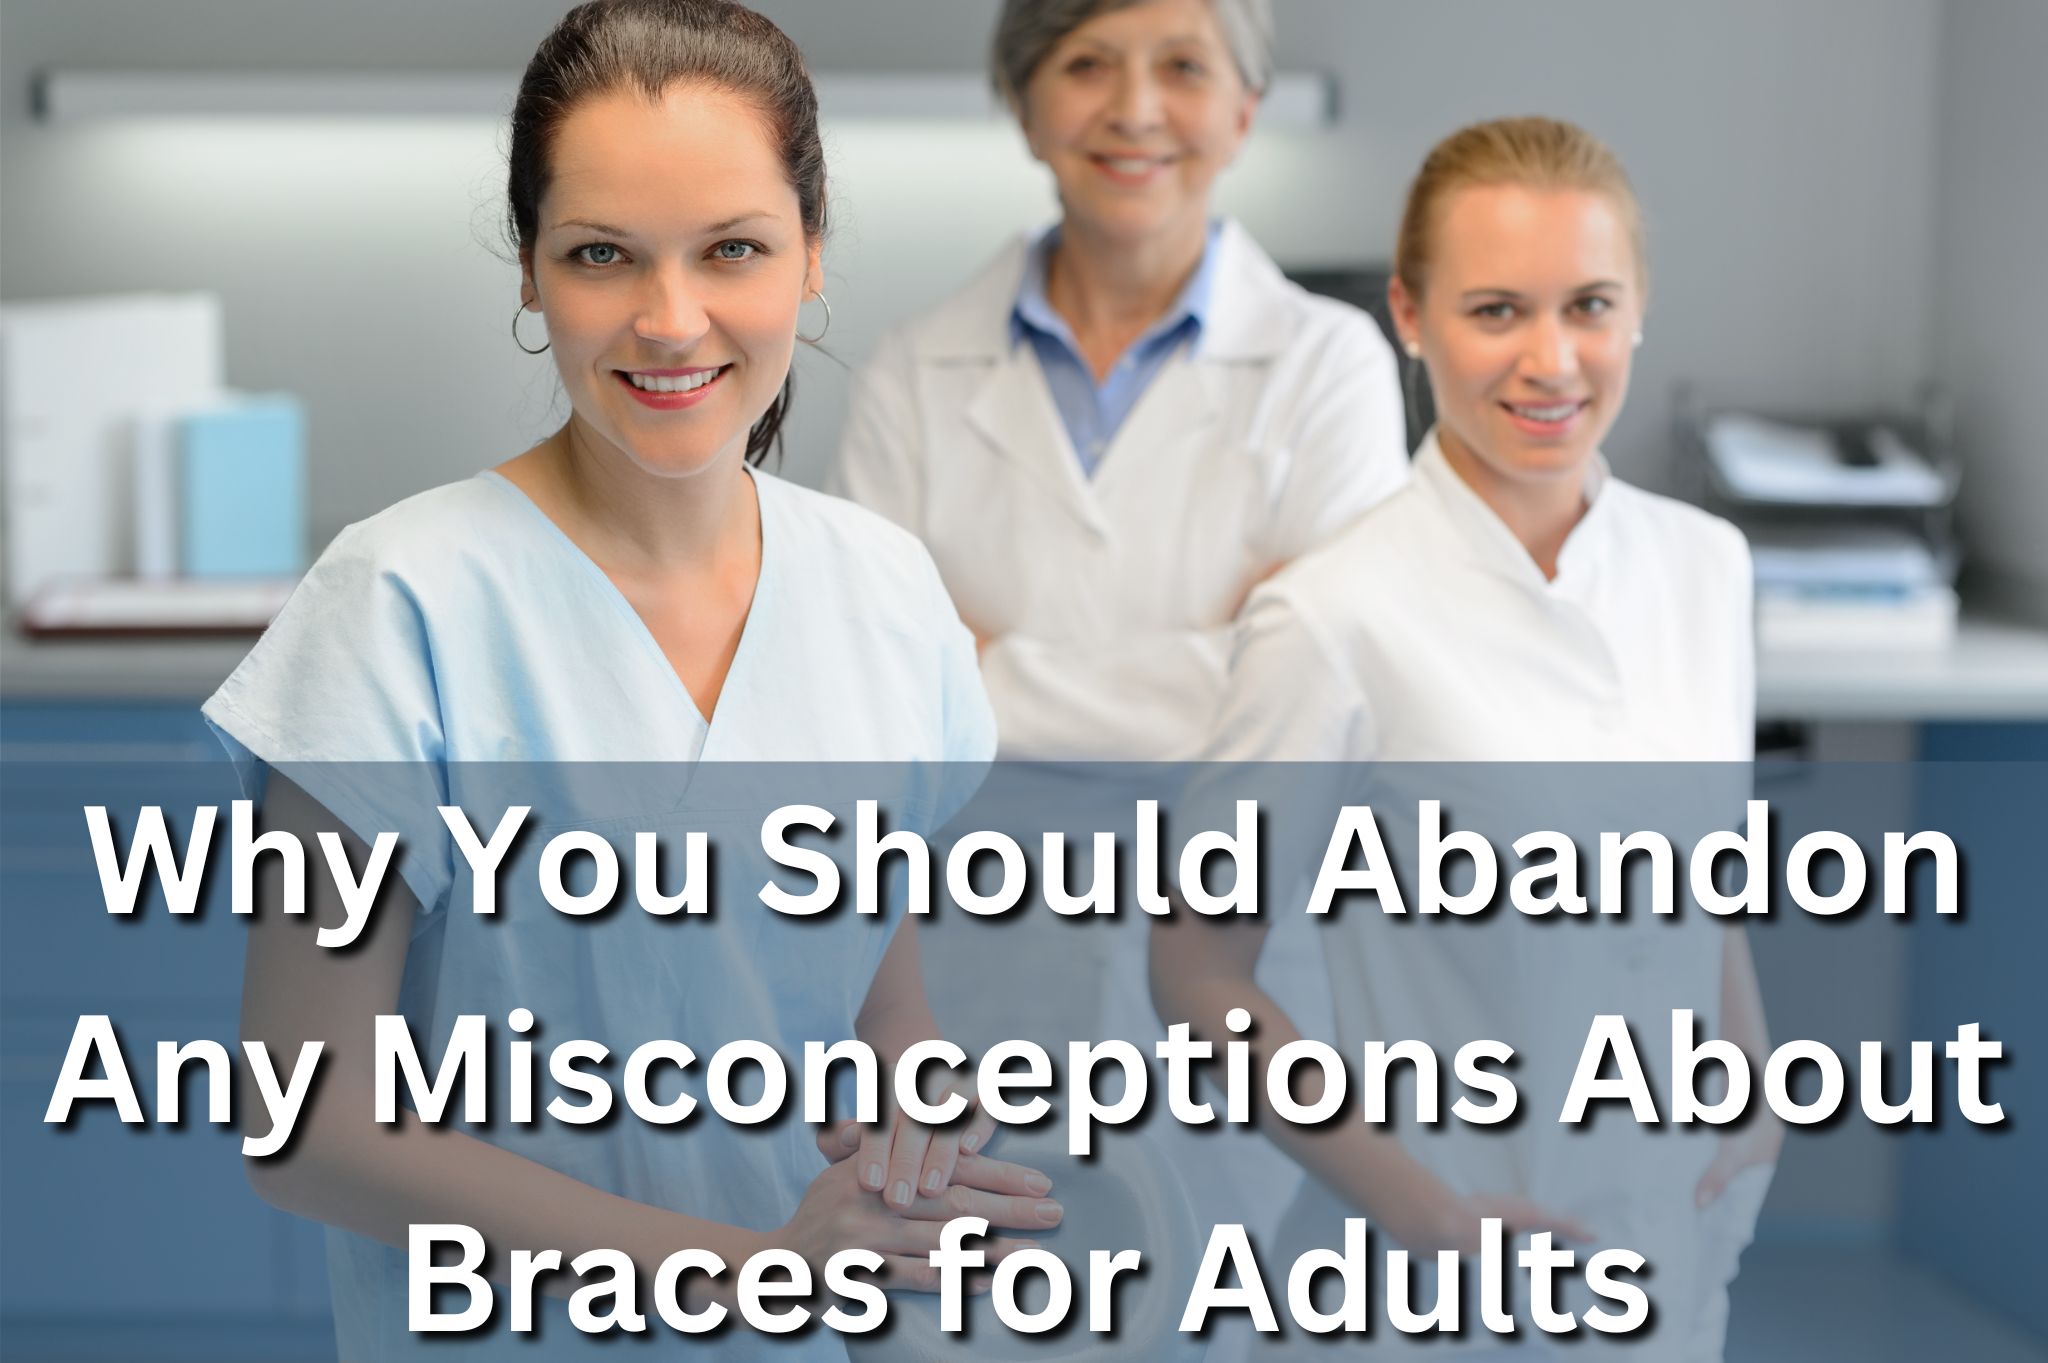 Orthodontics LA - Why You Should Abandon Any Misconceptions About Braces for Adults